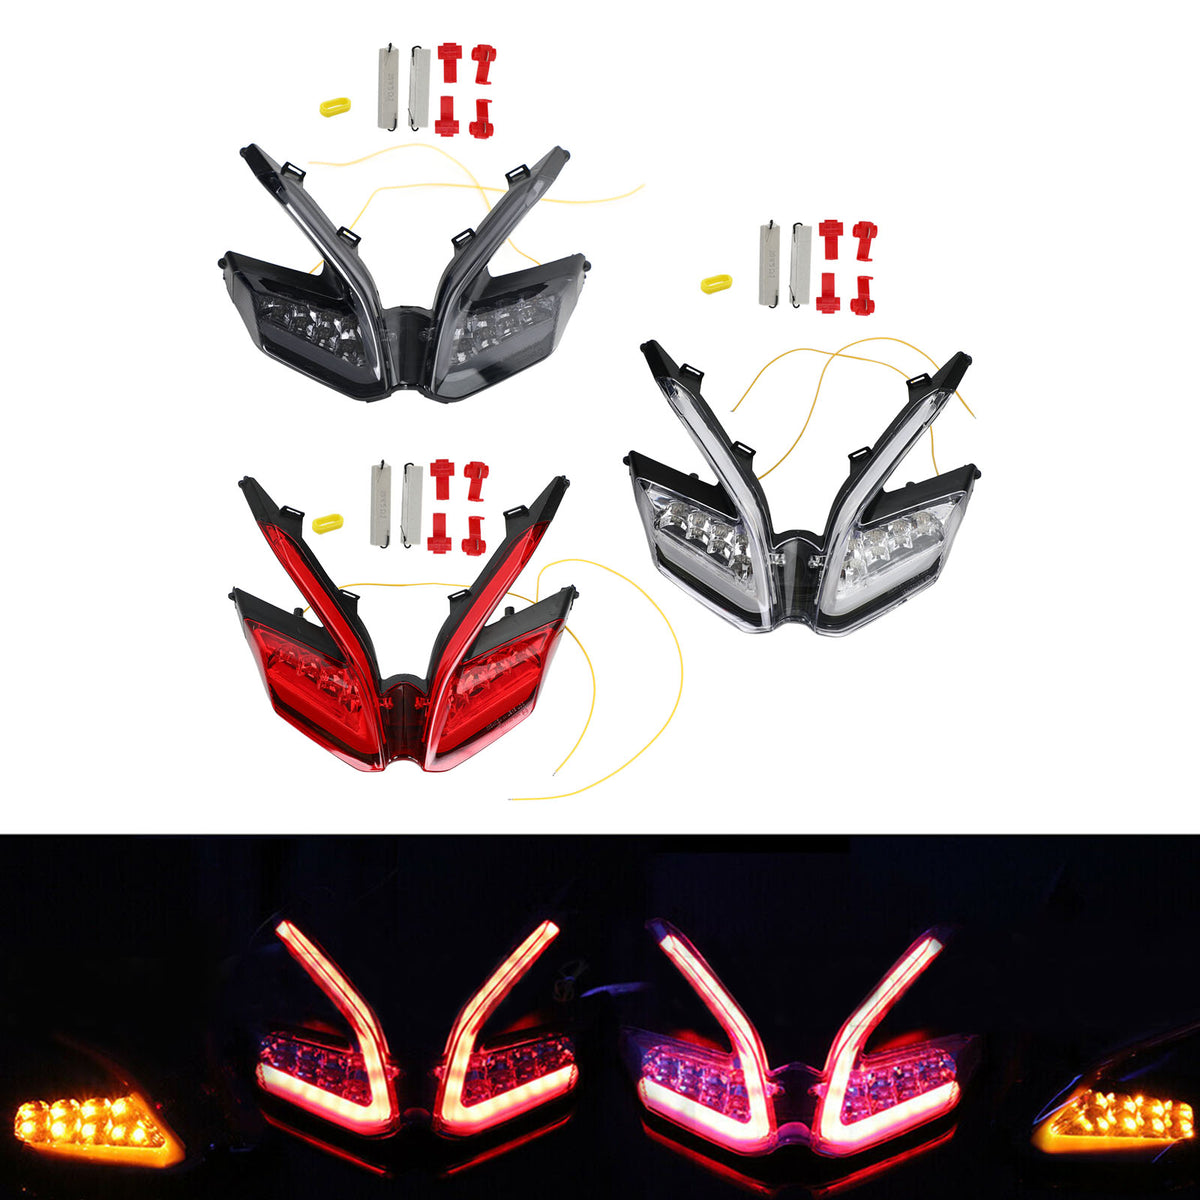 LED Integrated Tail Light Turn Signals For Ducati 959 899 1299 1199 Panigale Generic